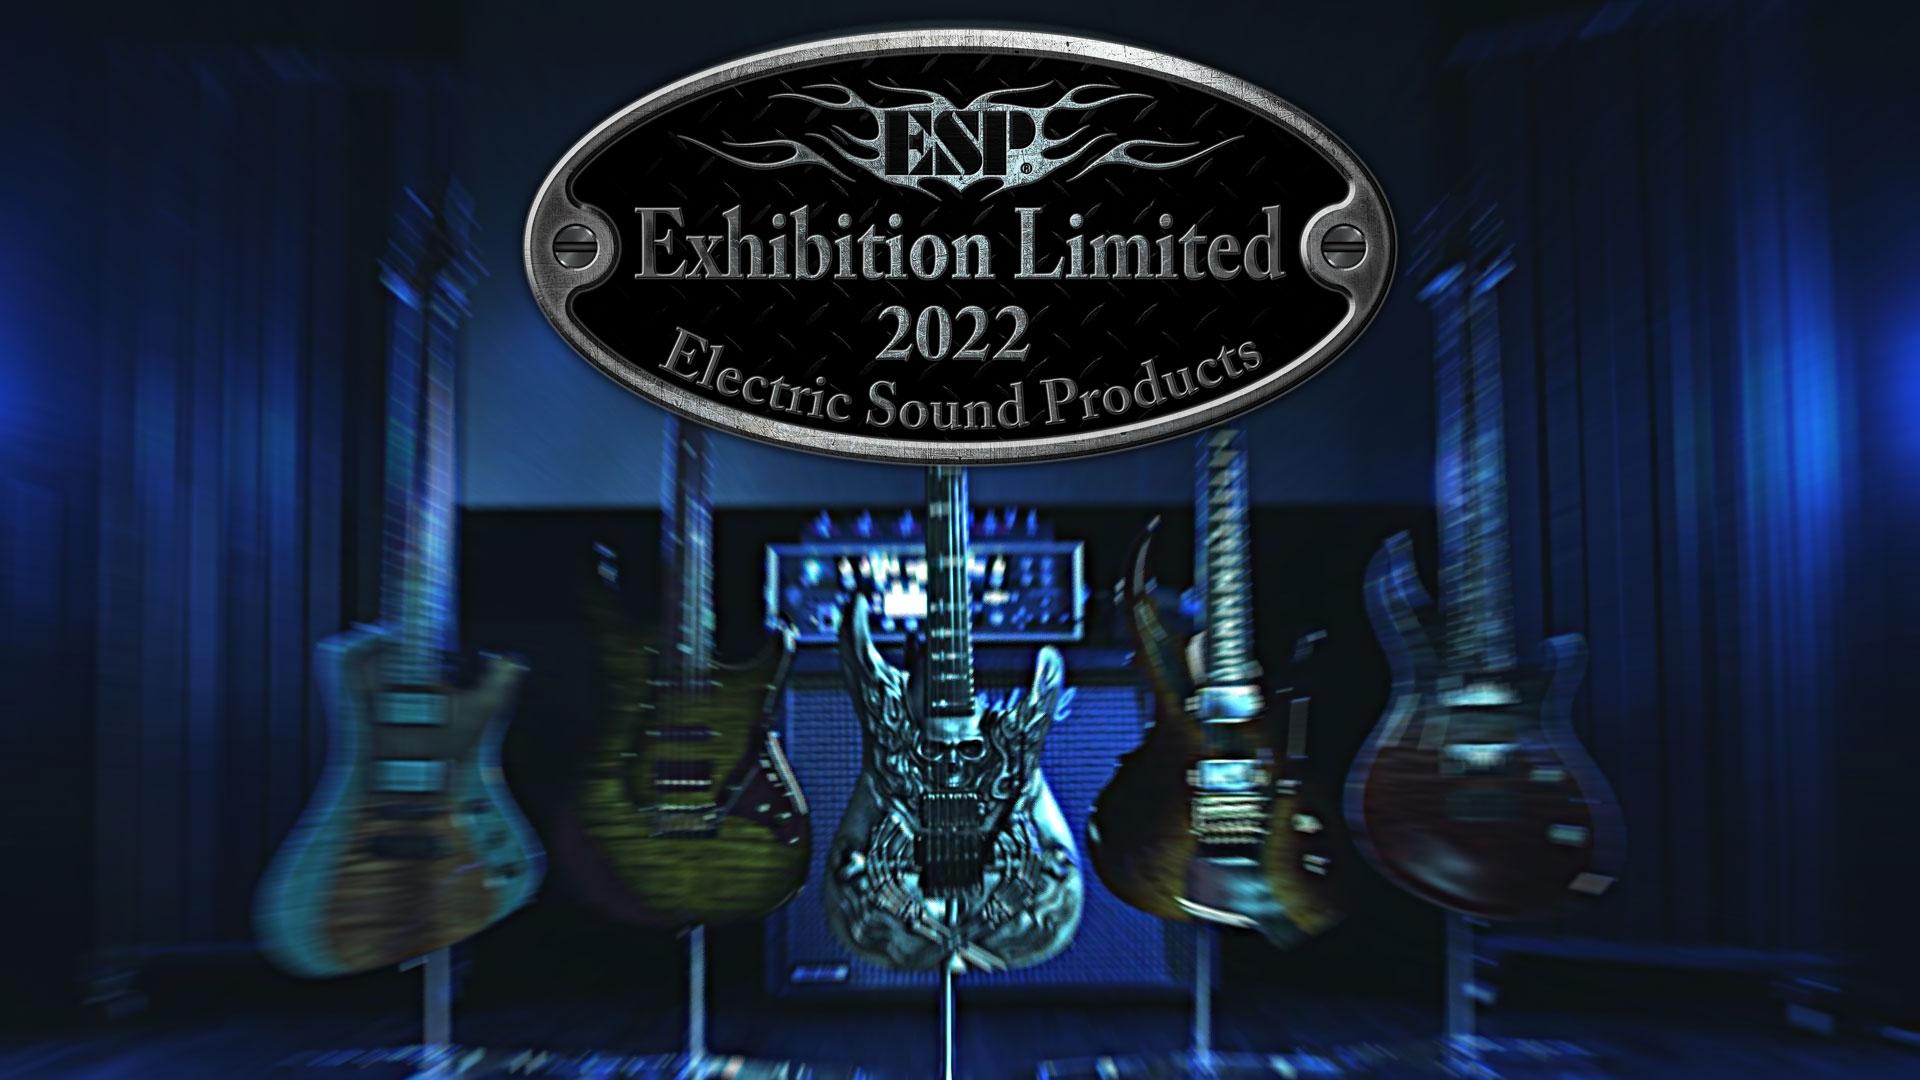 EXHIBITION LIMITED 2022